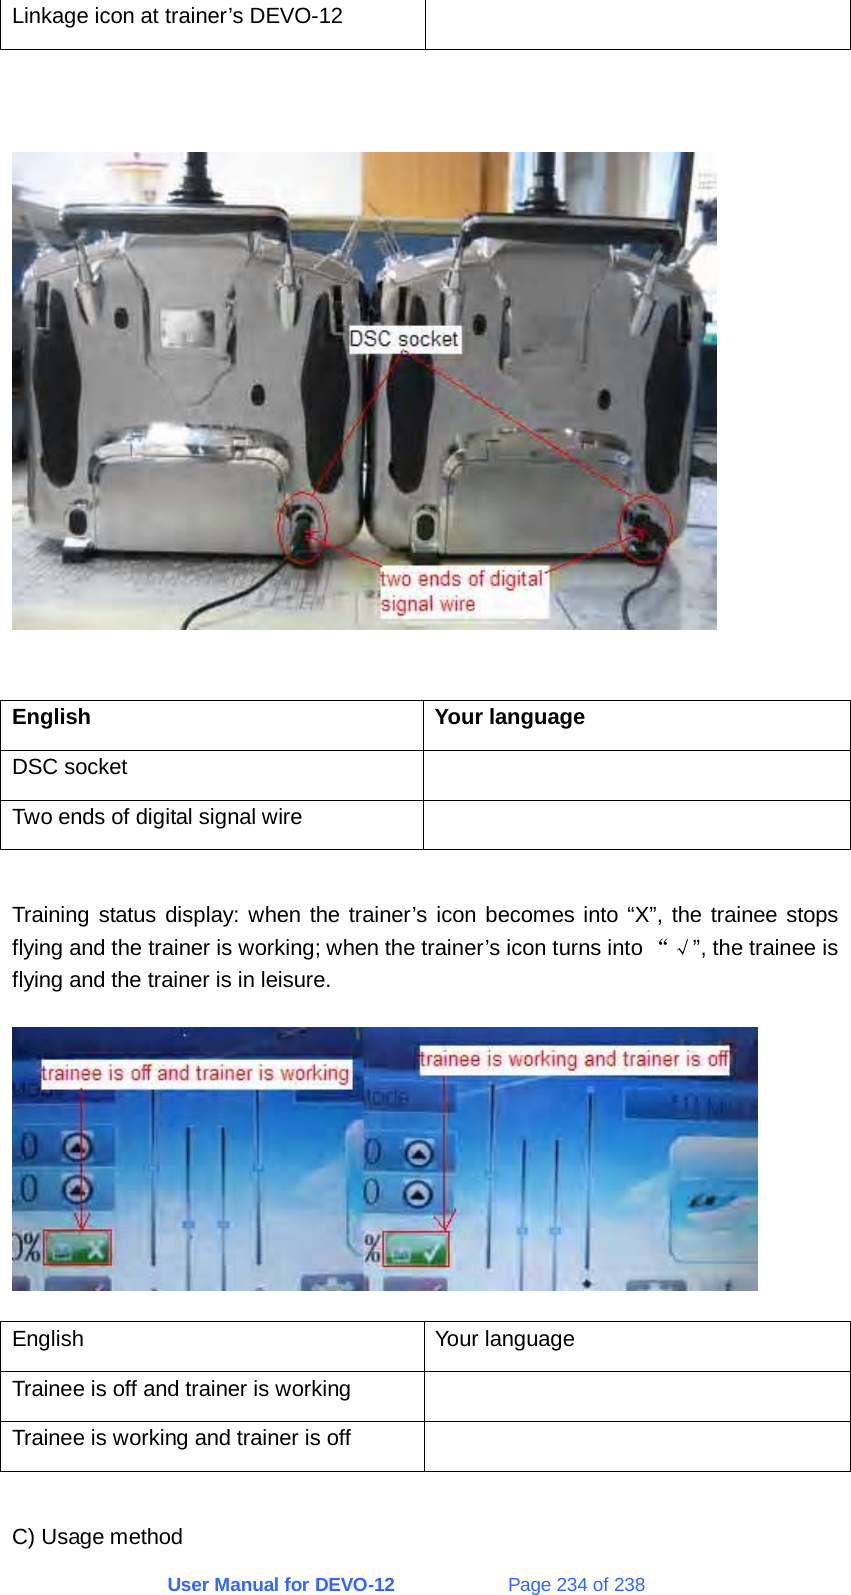 User Manual for DEVO-12             Page 234 of 238 Linkage icon at trainer’s DEVO-12       English Your language DSC socket   Two ends of digital signal wire    Training status display: when the trainer’s icon becomes into “X”, the trainee stops flying and the trainer is working; when the trainer’s icon turns into “√”, the trainee is flying and the trainer is in leisure.  English Your language Trainee is off and trainer is working   Trainee is working and trainer is off    C) Usage method 